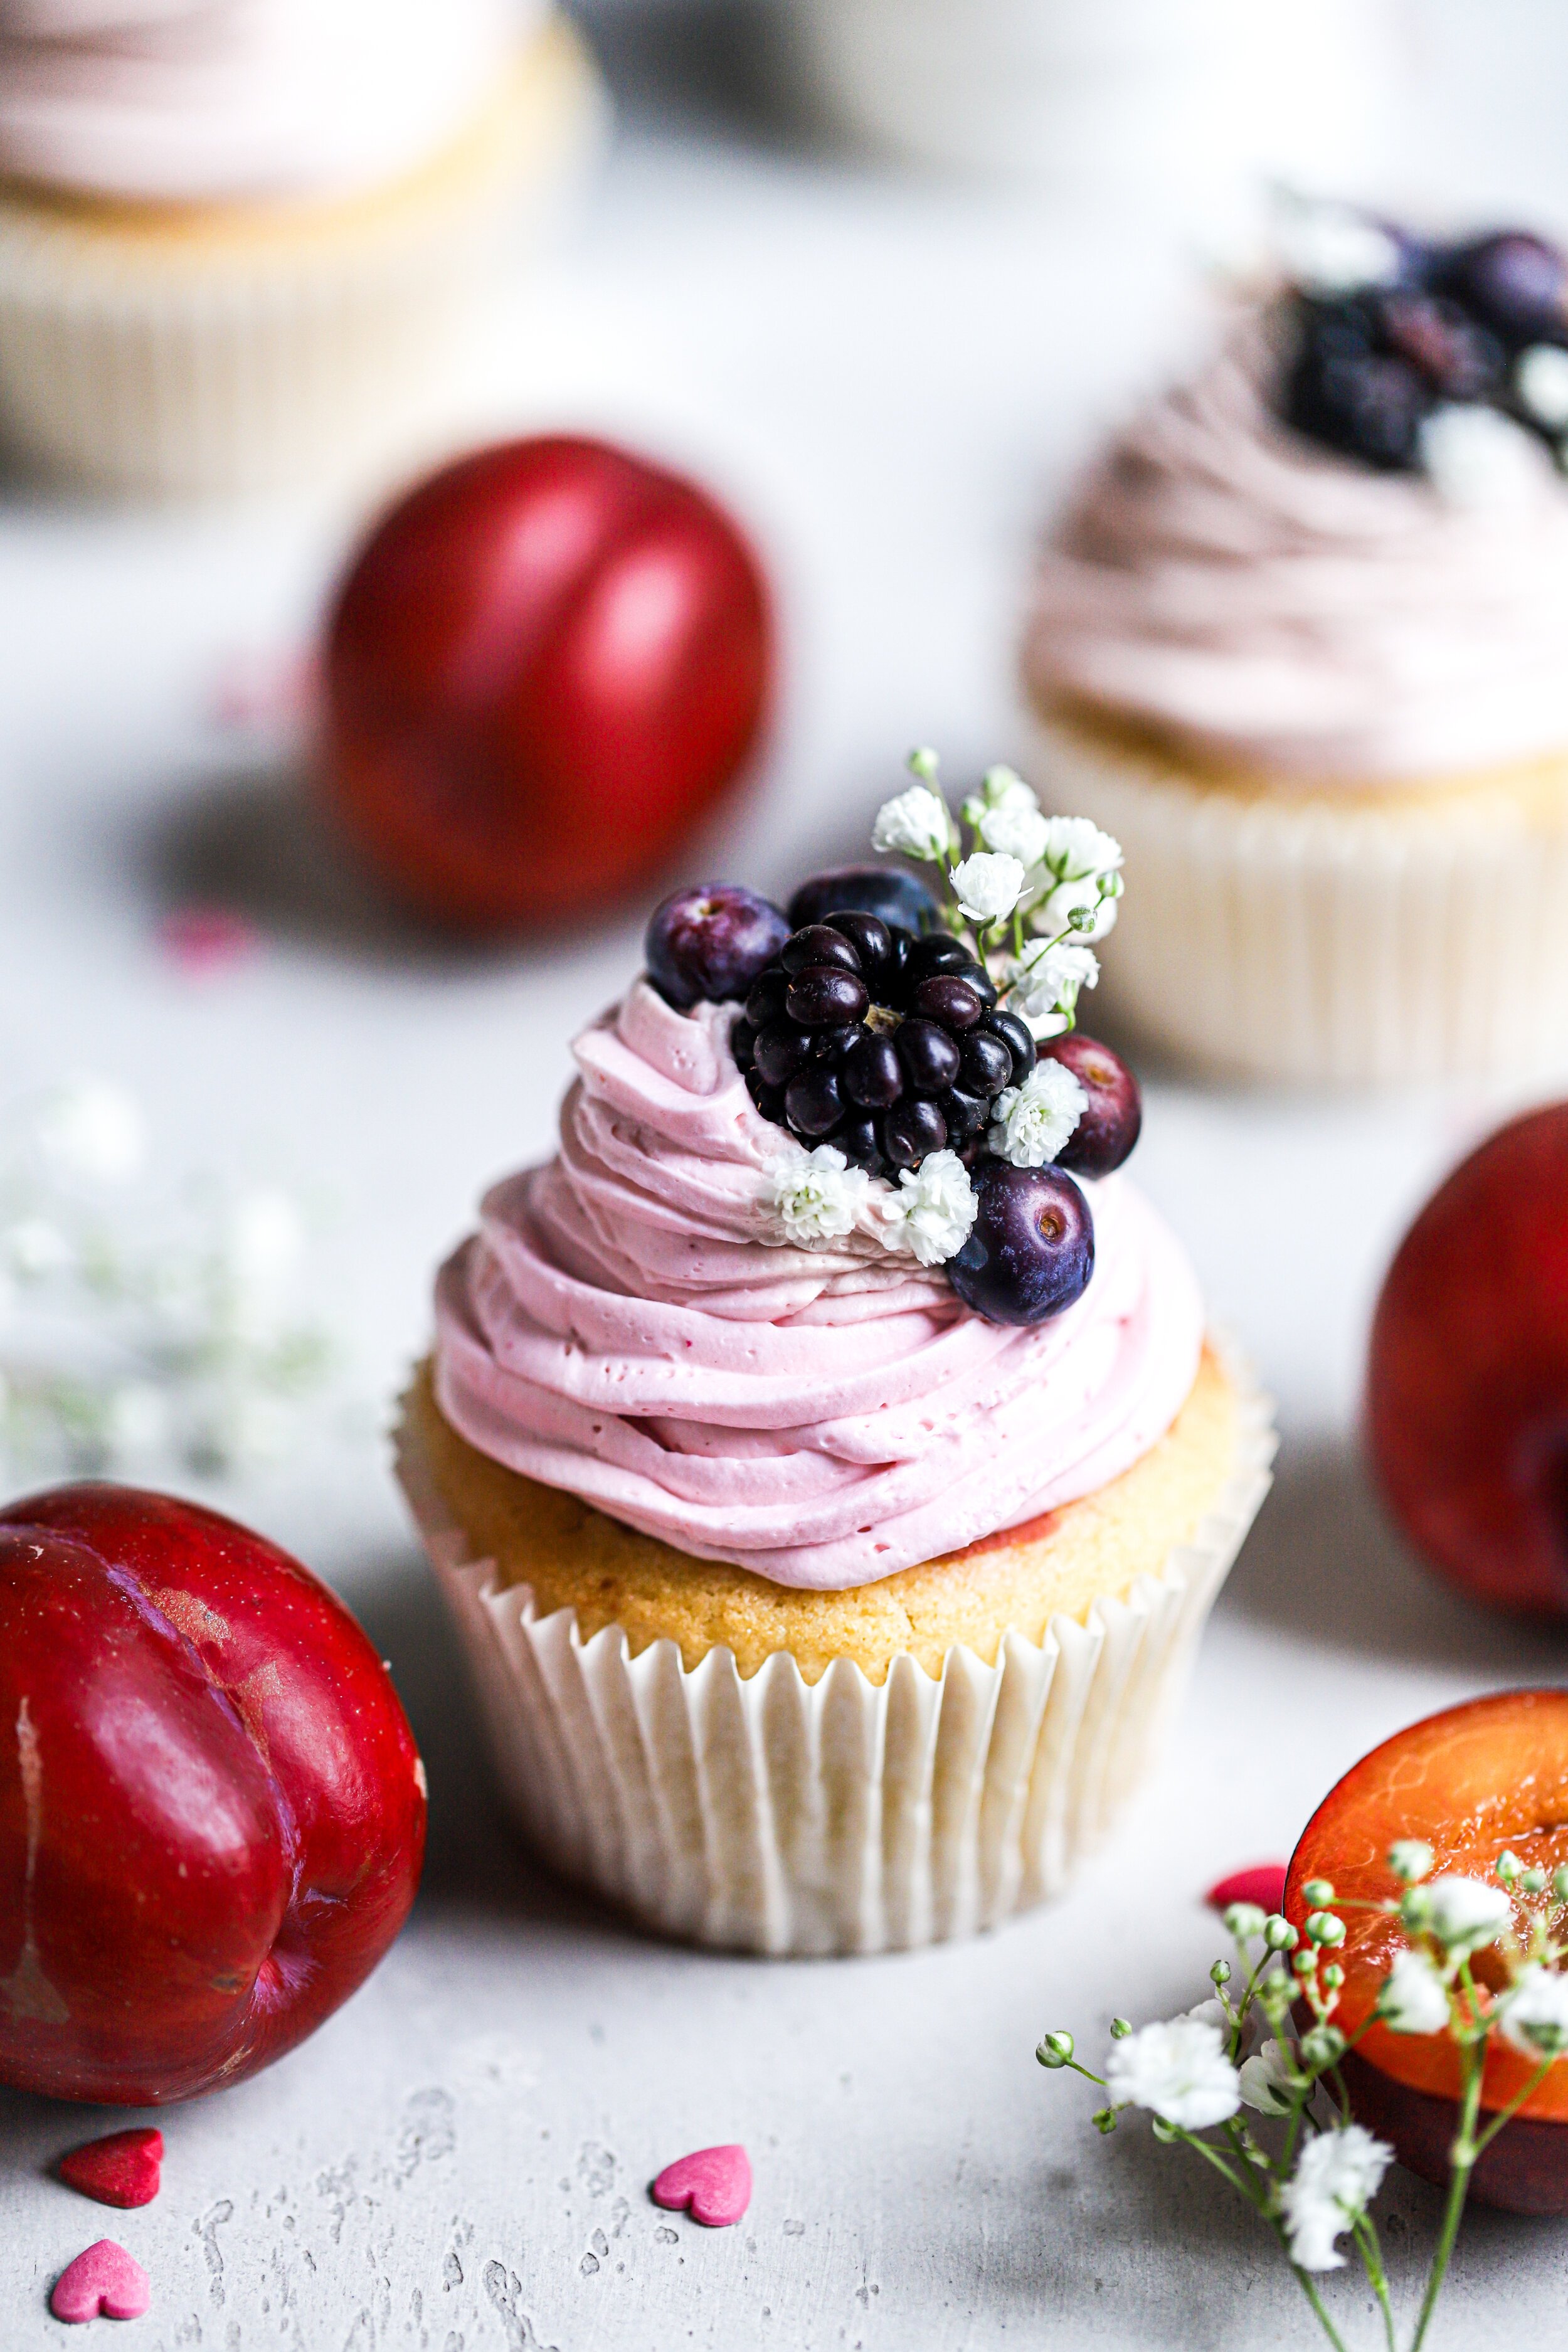 VEGAN VANILLA FROSTED SOUTH AFRICAN PLUM CUPCAKES